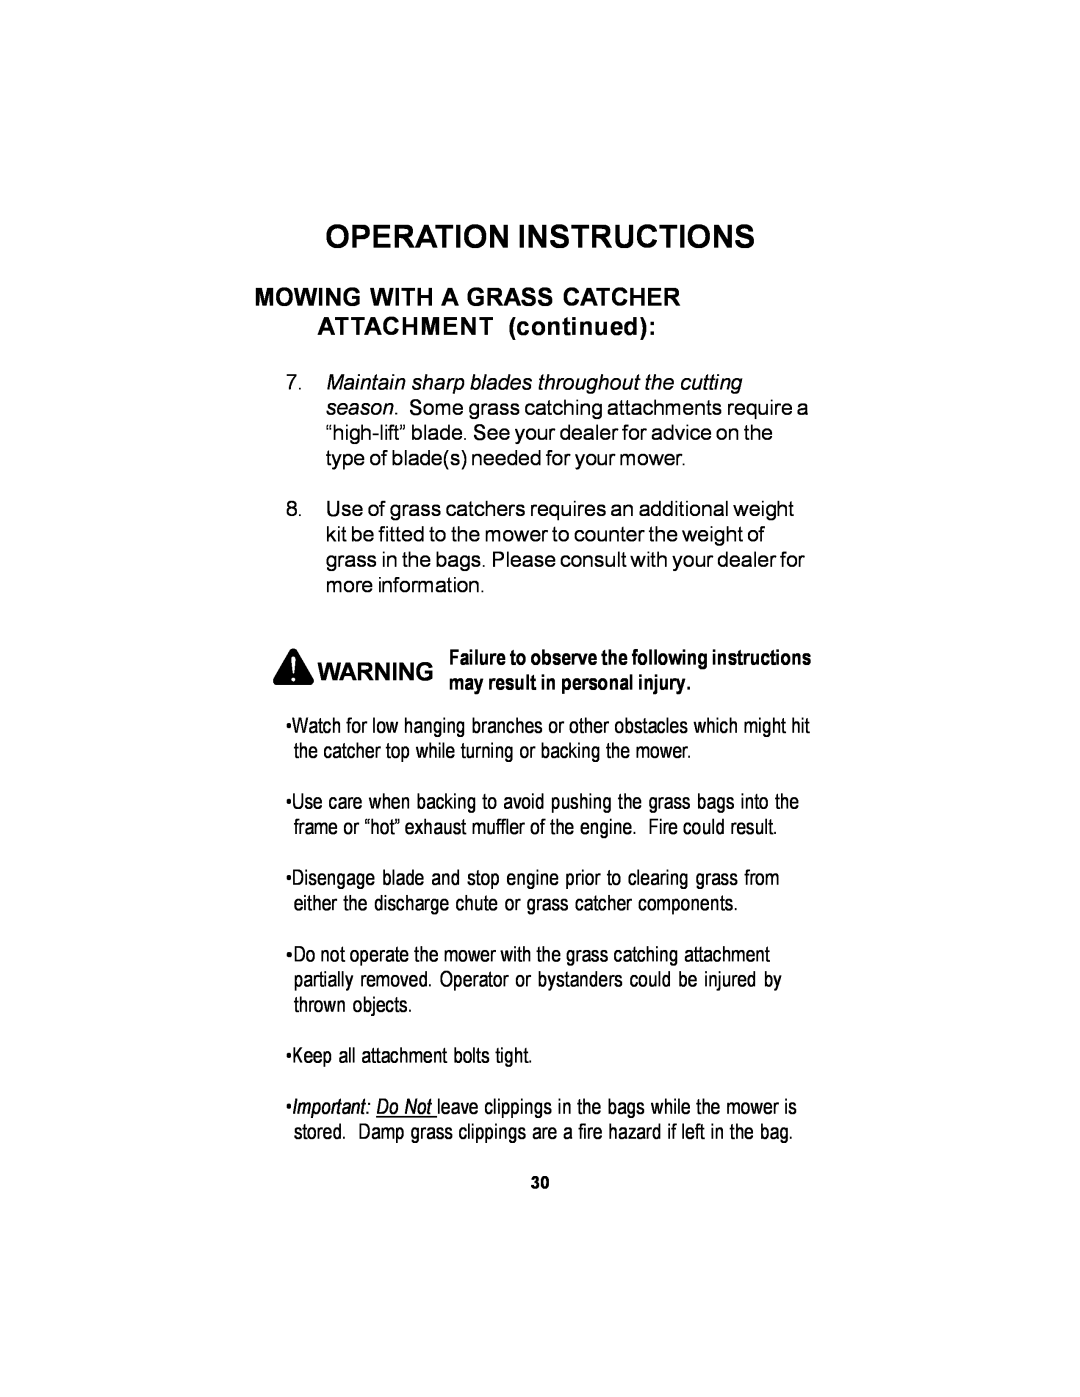 Dixon 11249-106 manual MOWING WITH A GRASS CATCHER ATTACHMENT continued, Operation Instructions 